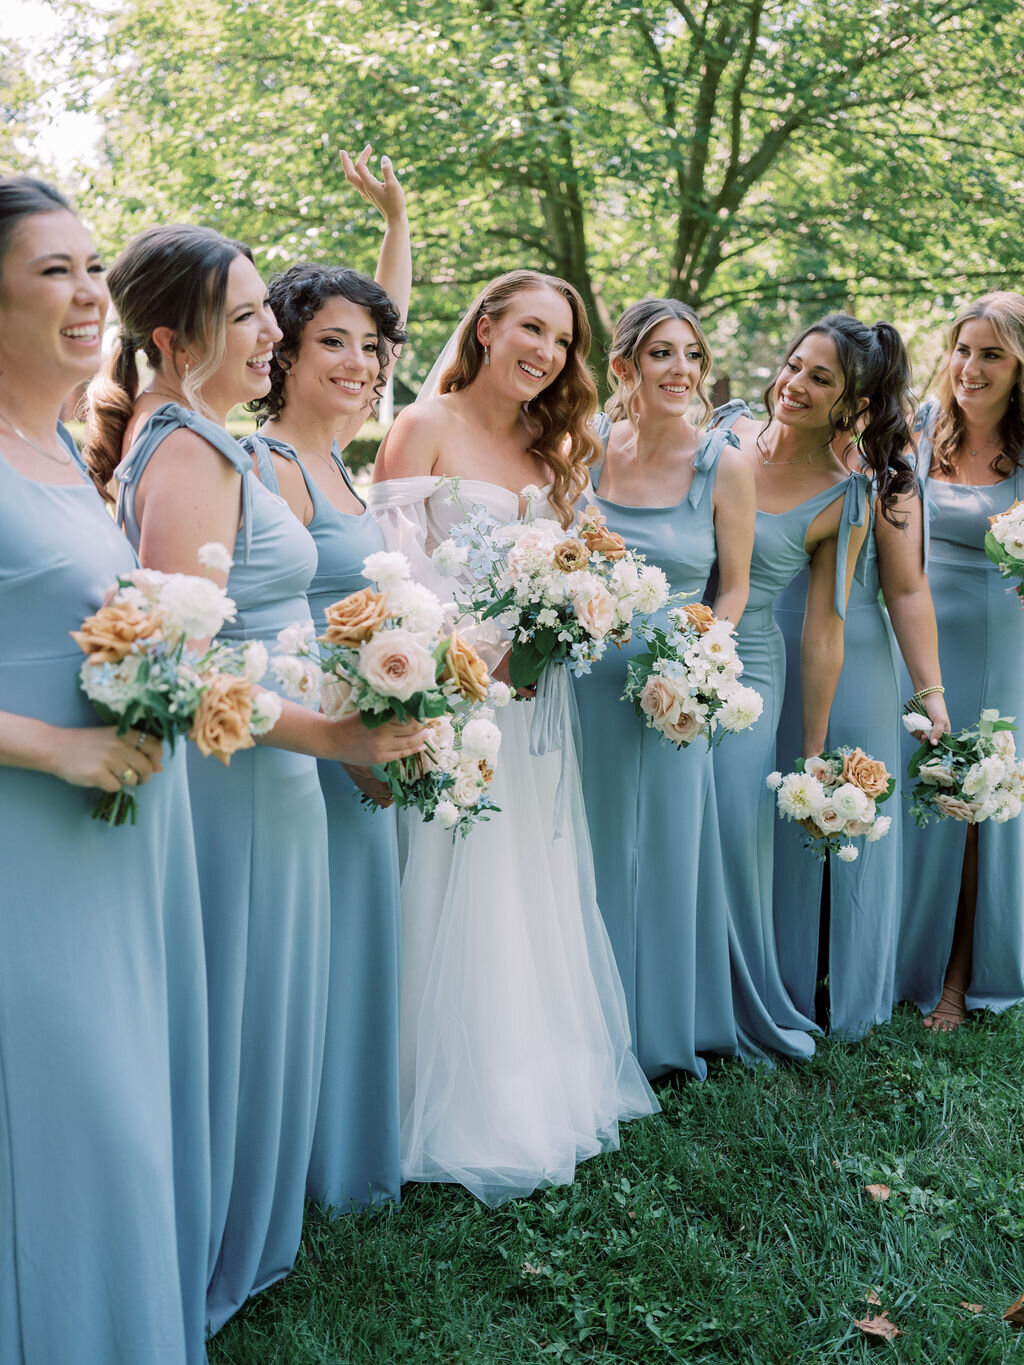 Bride and bridesmaids in blue dresses holding bouquets of peach garden rose, white dahlia, toffee roses, white hydrangea, light blue delphinium and brown lisianthus.